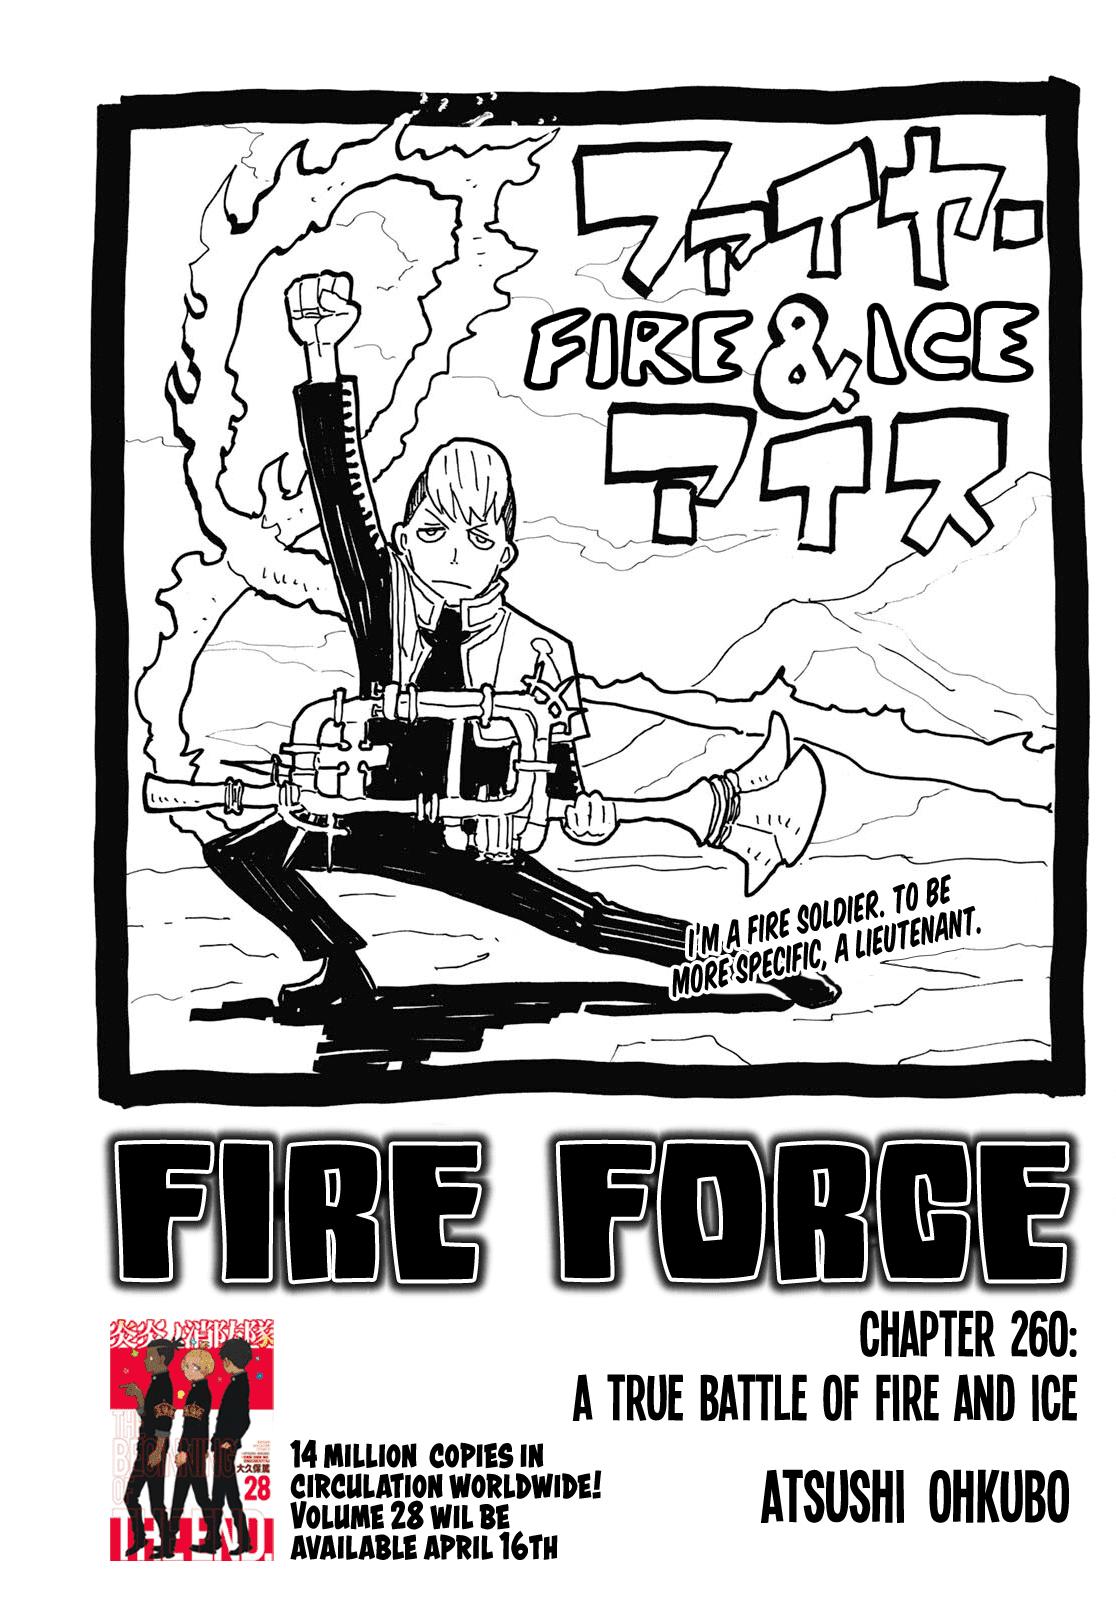 Fire Force Vol. 1 See more